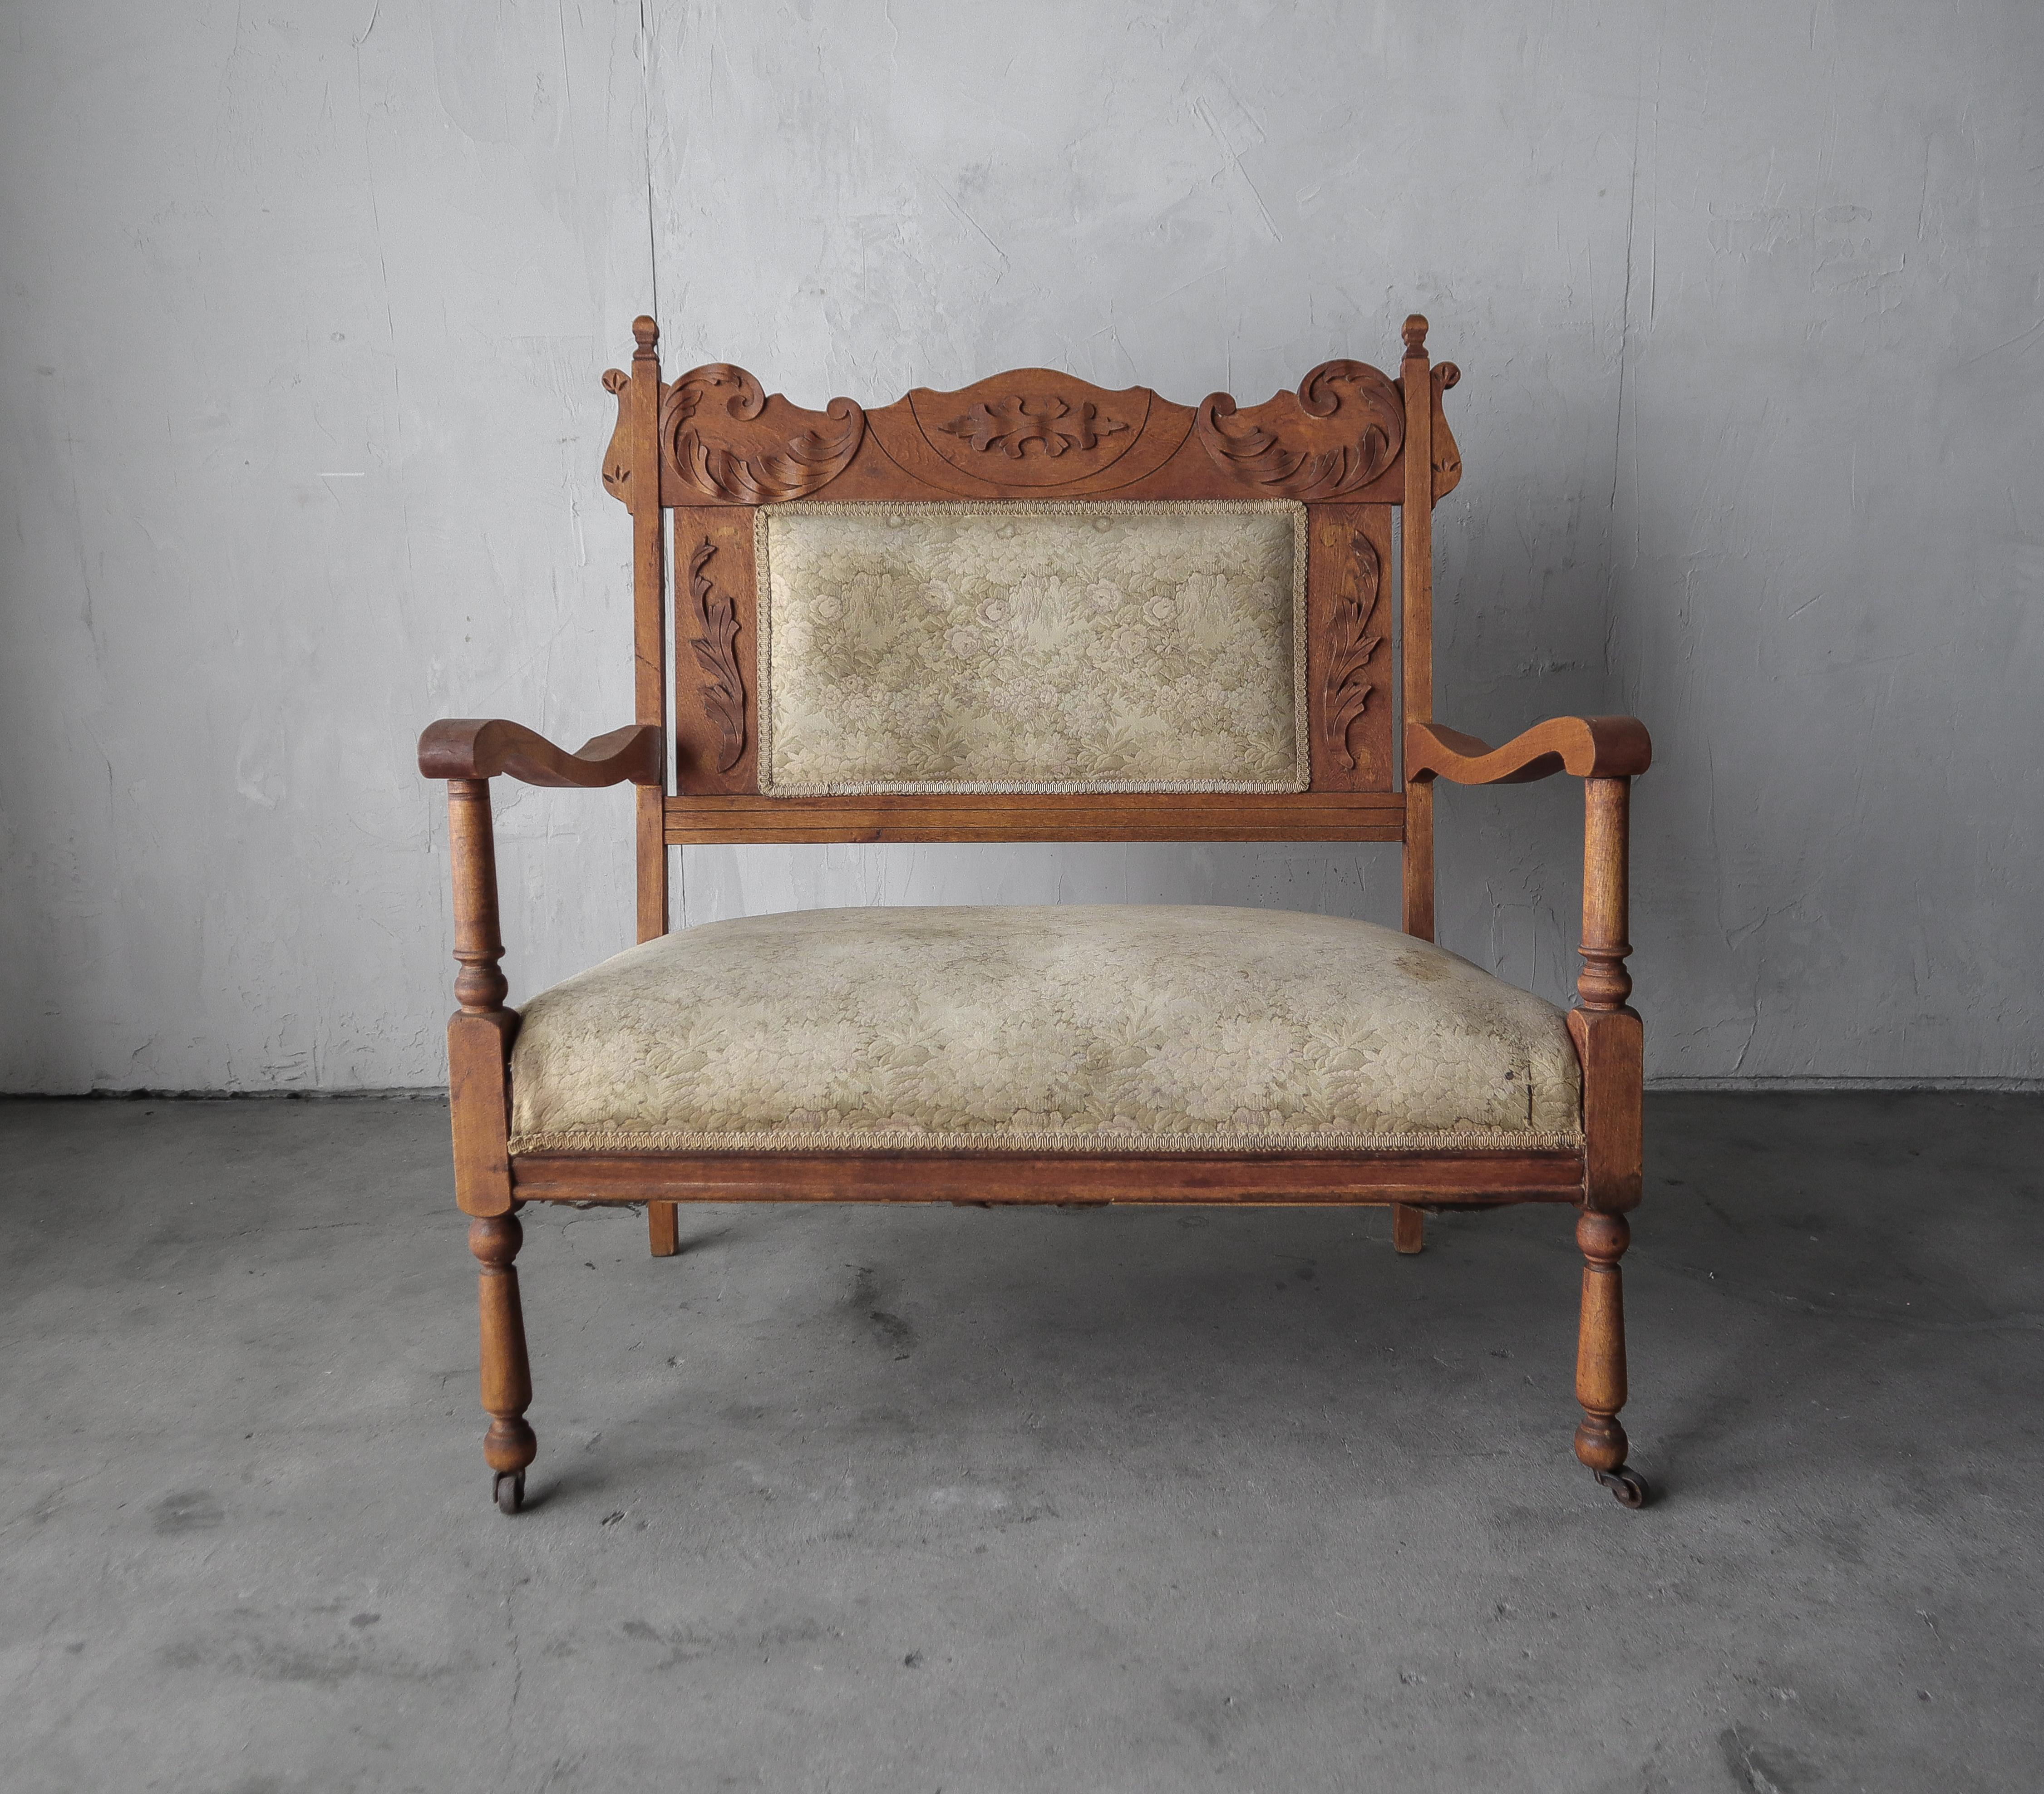 A beautiful antique sitting piece, with intricate carved wood details.  Can be used as a bench, settee or an oversized chair.  A beautiful antique decor piece.

Left as found, structurally the piece is sound, and we left the original fabric because